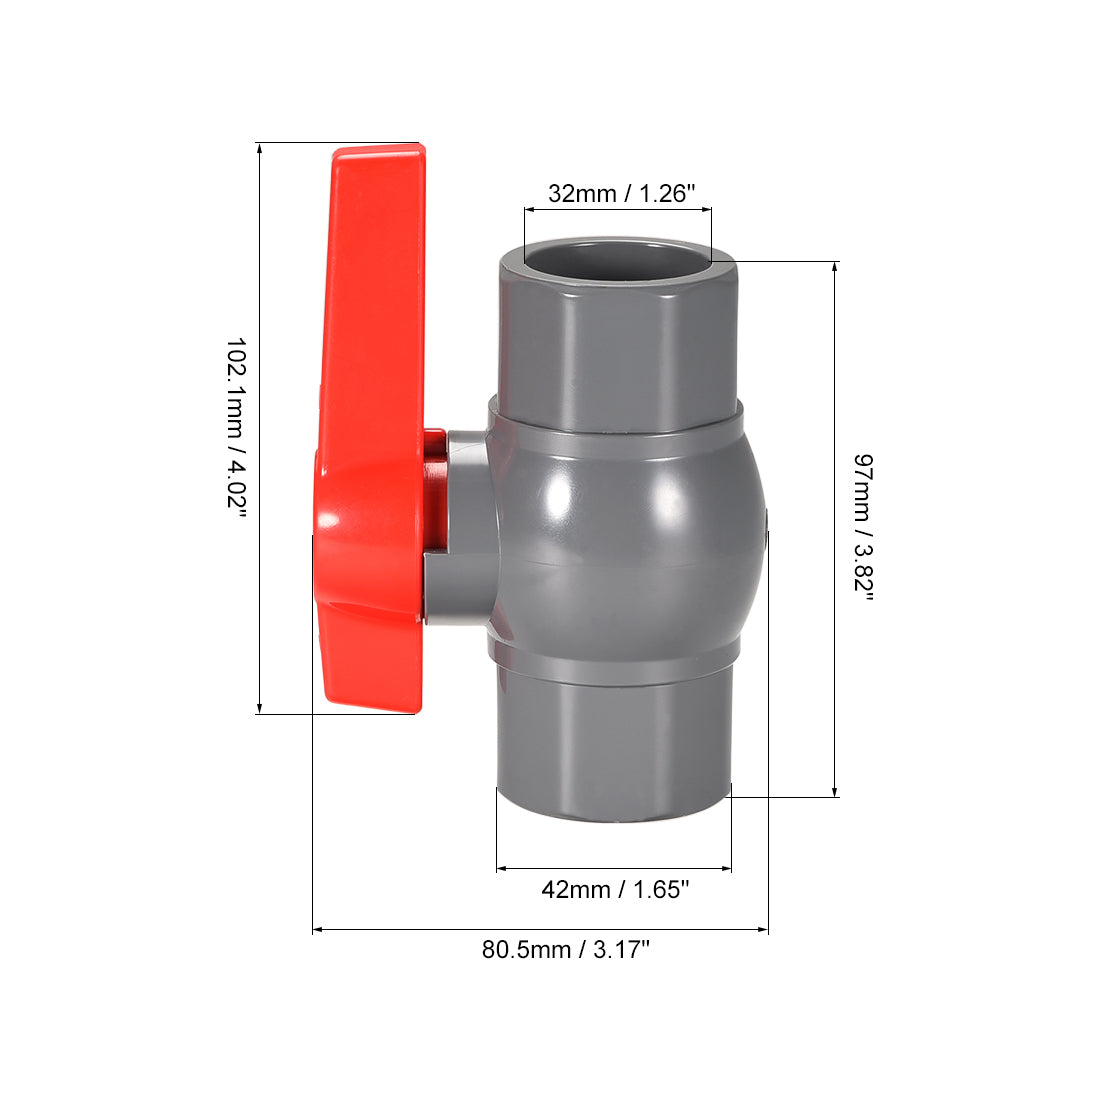 uxcell Uxcell Ball Valve, Socket Type, for Control Water Flow, PVC Grey 2Pcs